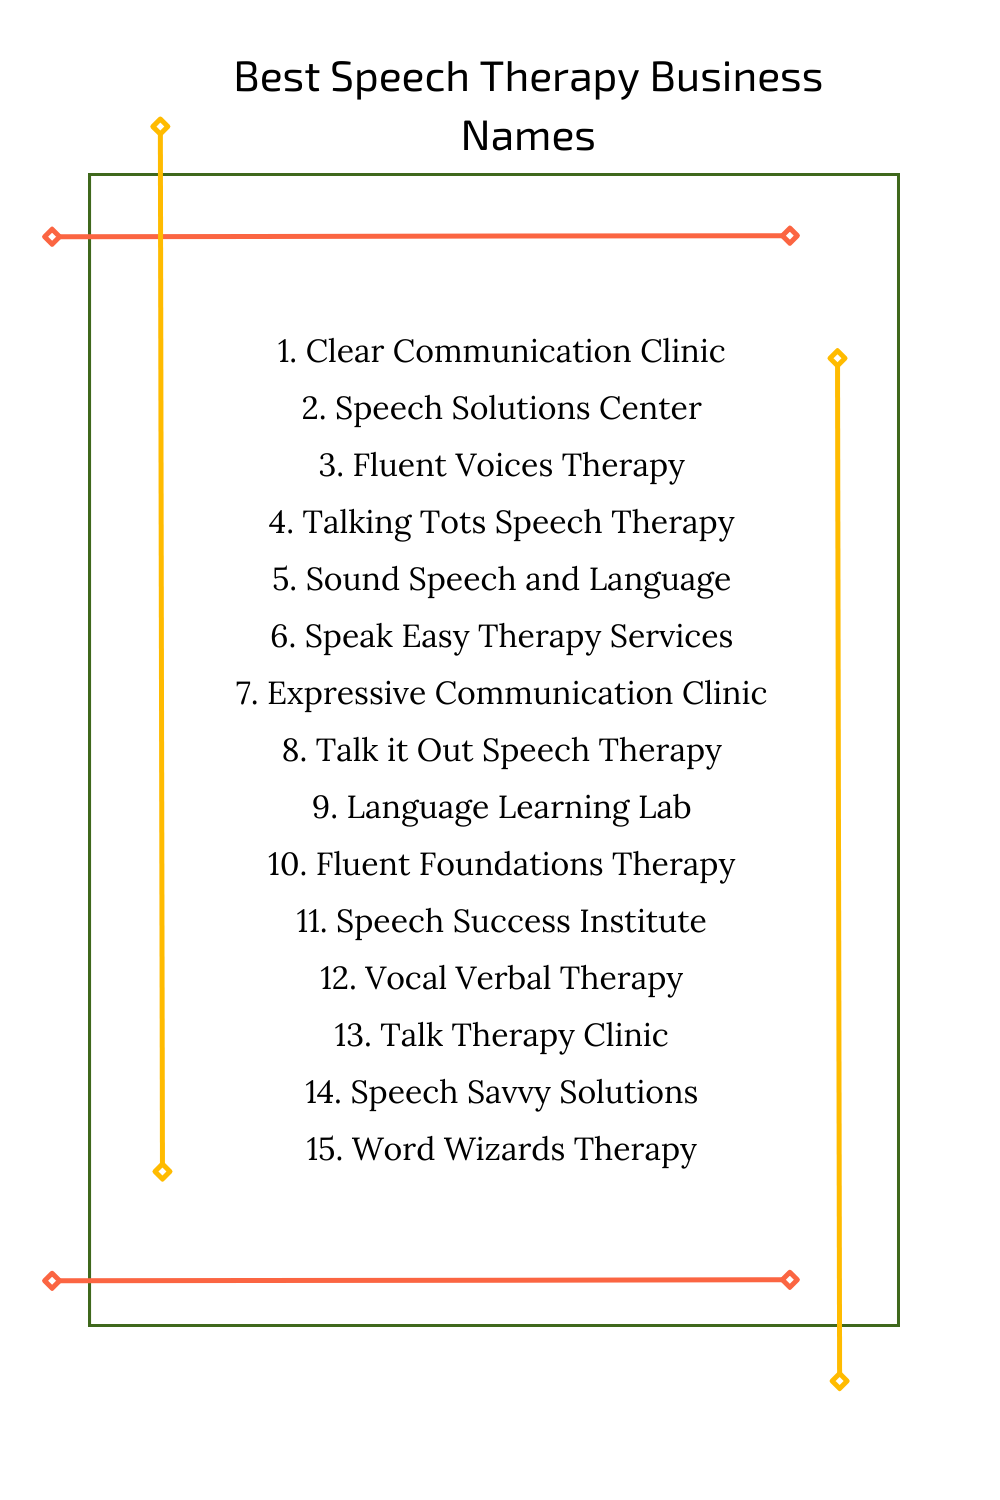 Best Speech Therapy Business Names